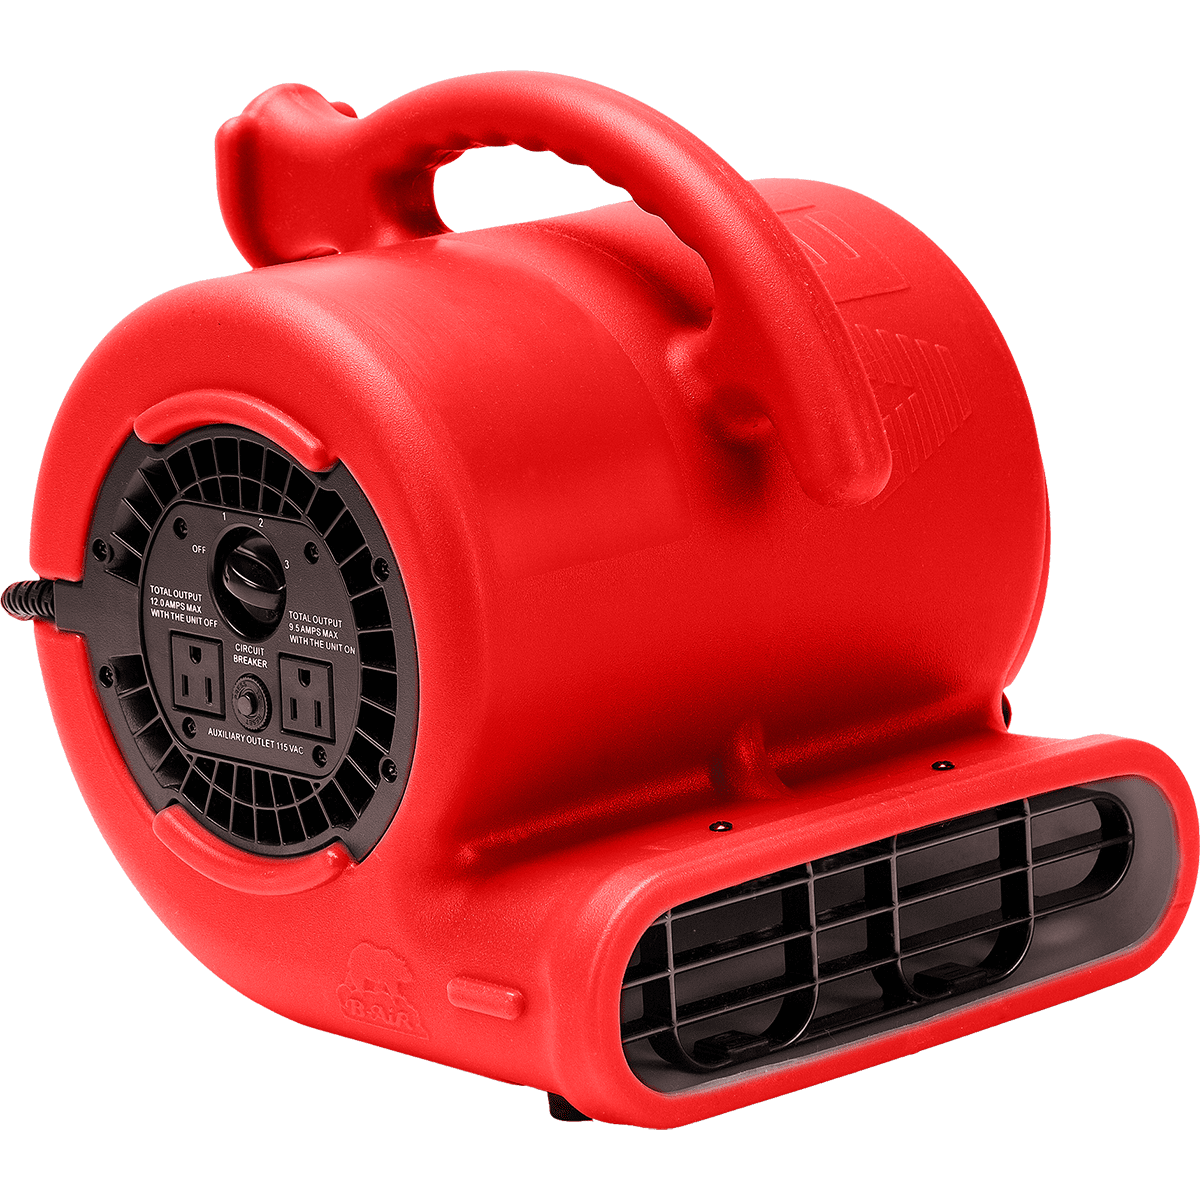 B-air Vent Vp-25 Compact Air Mover - Red